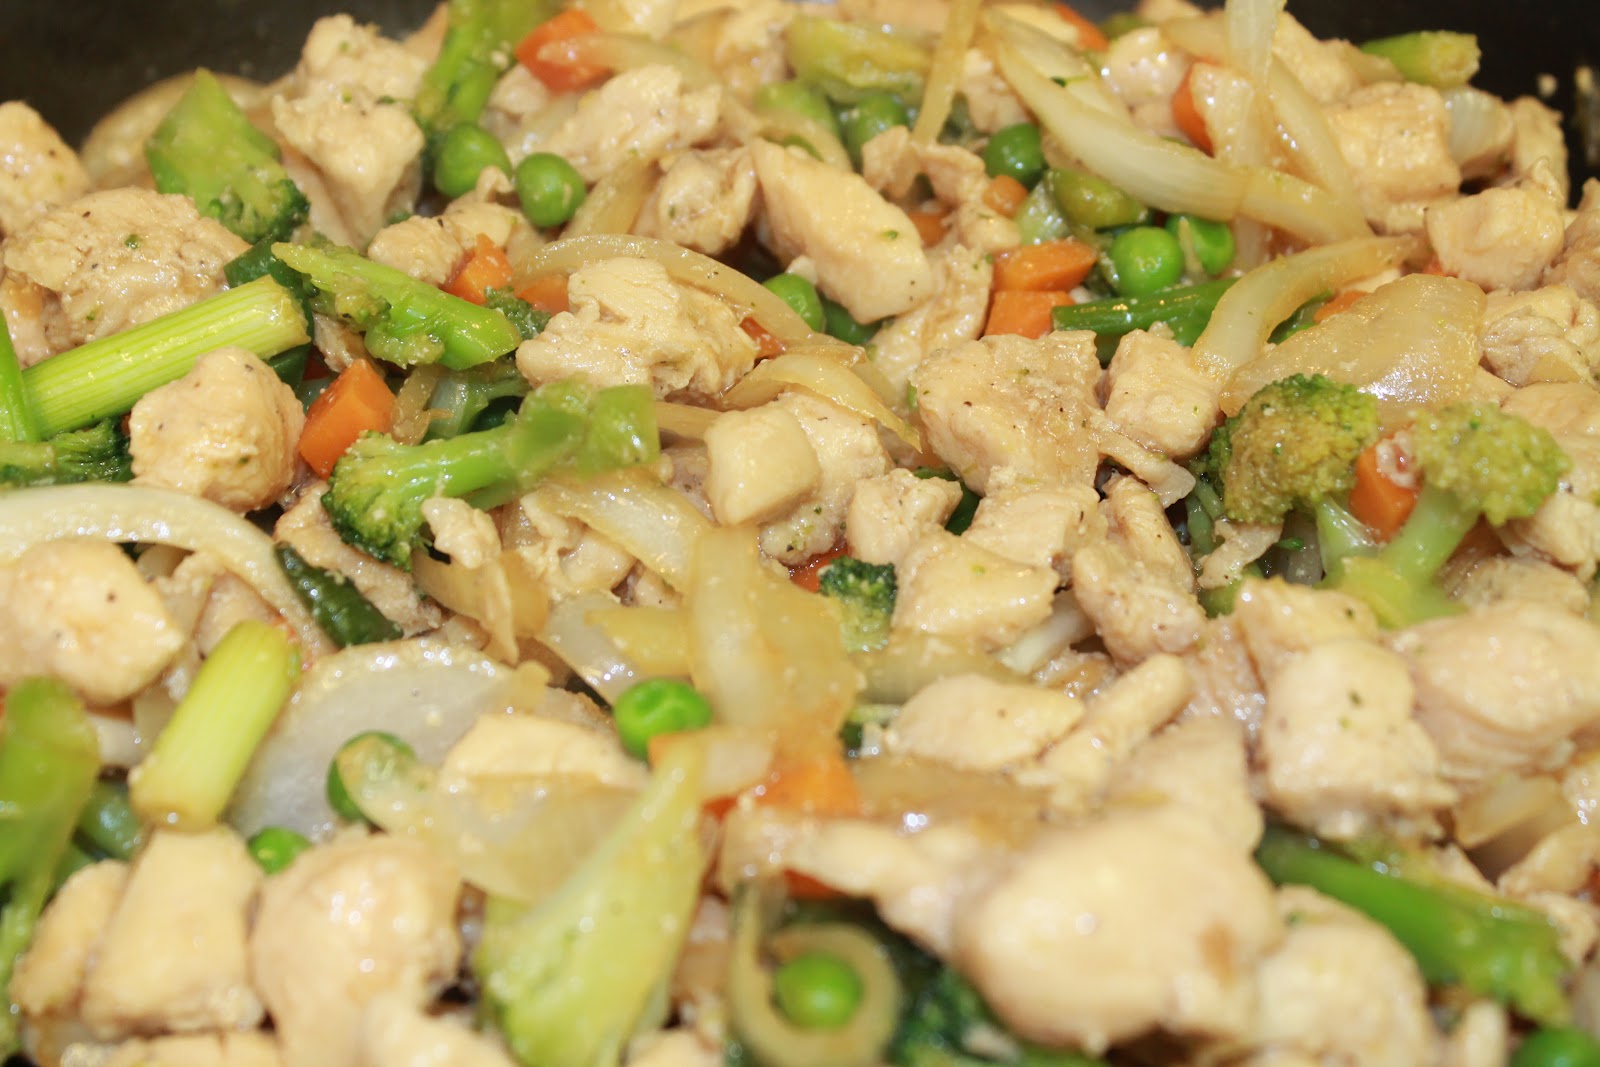 *Riches to Rags* by Dori: Homemade Chicken Stir Fry - The possibilities ...